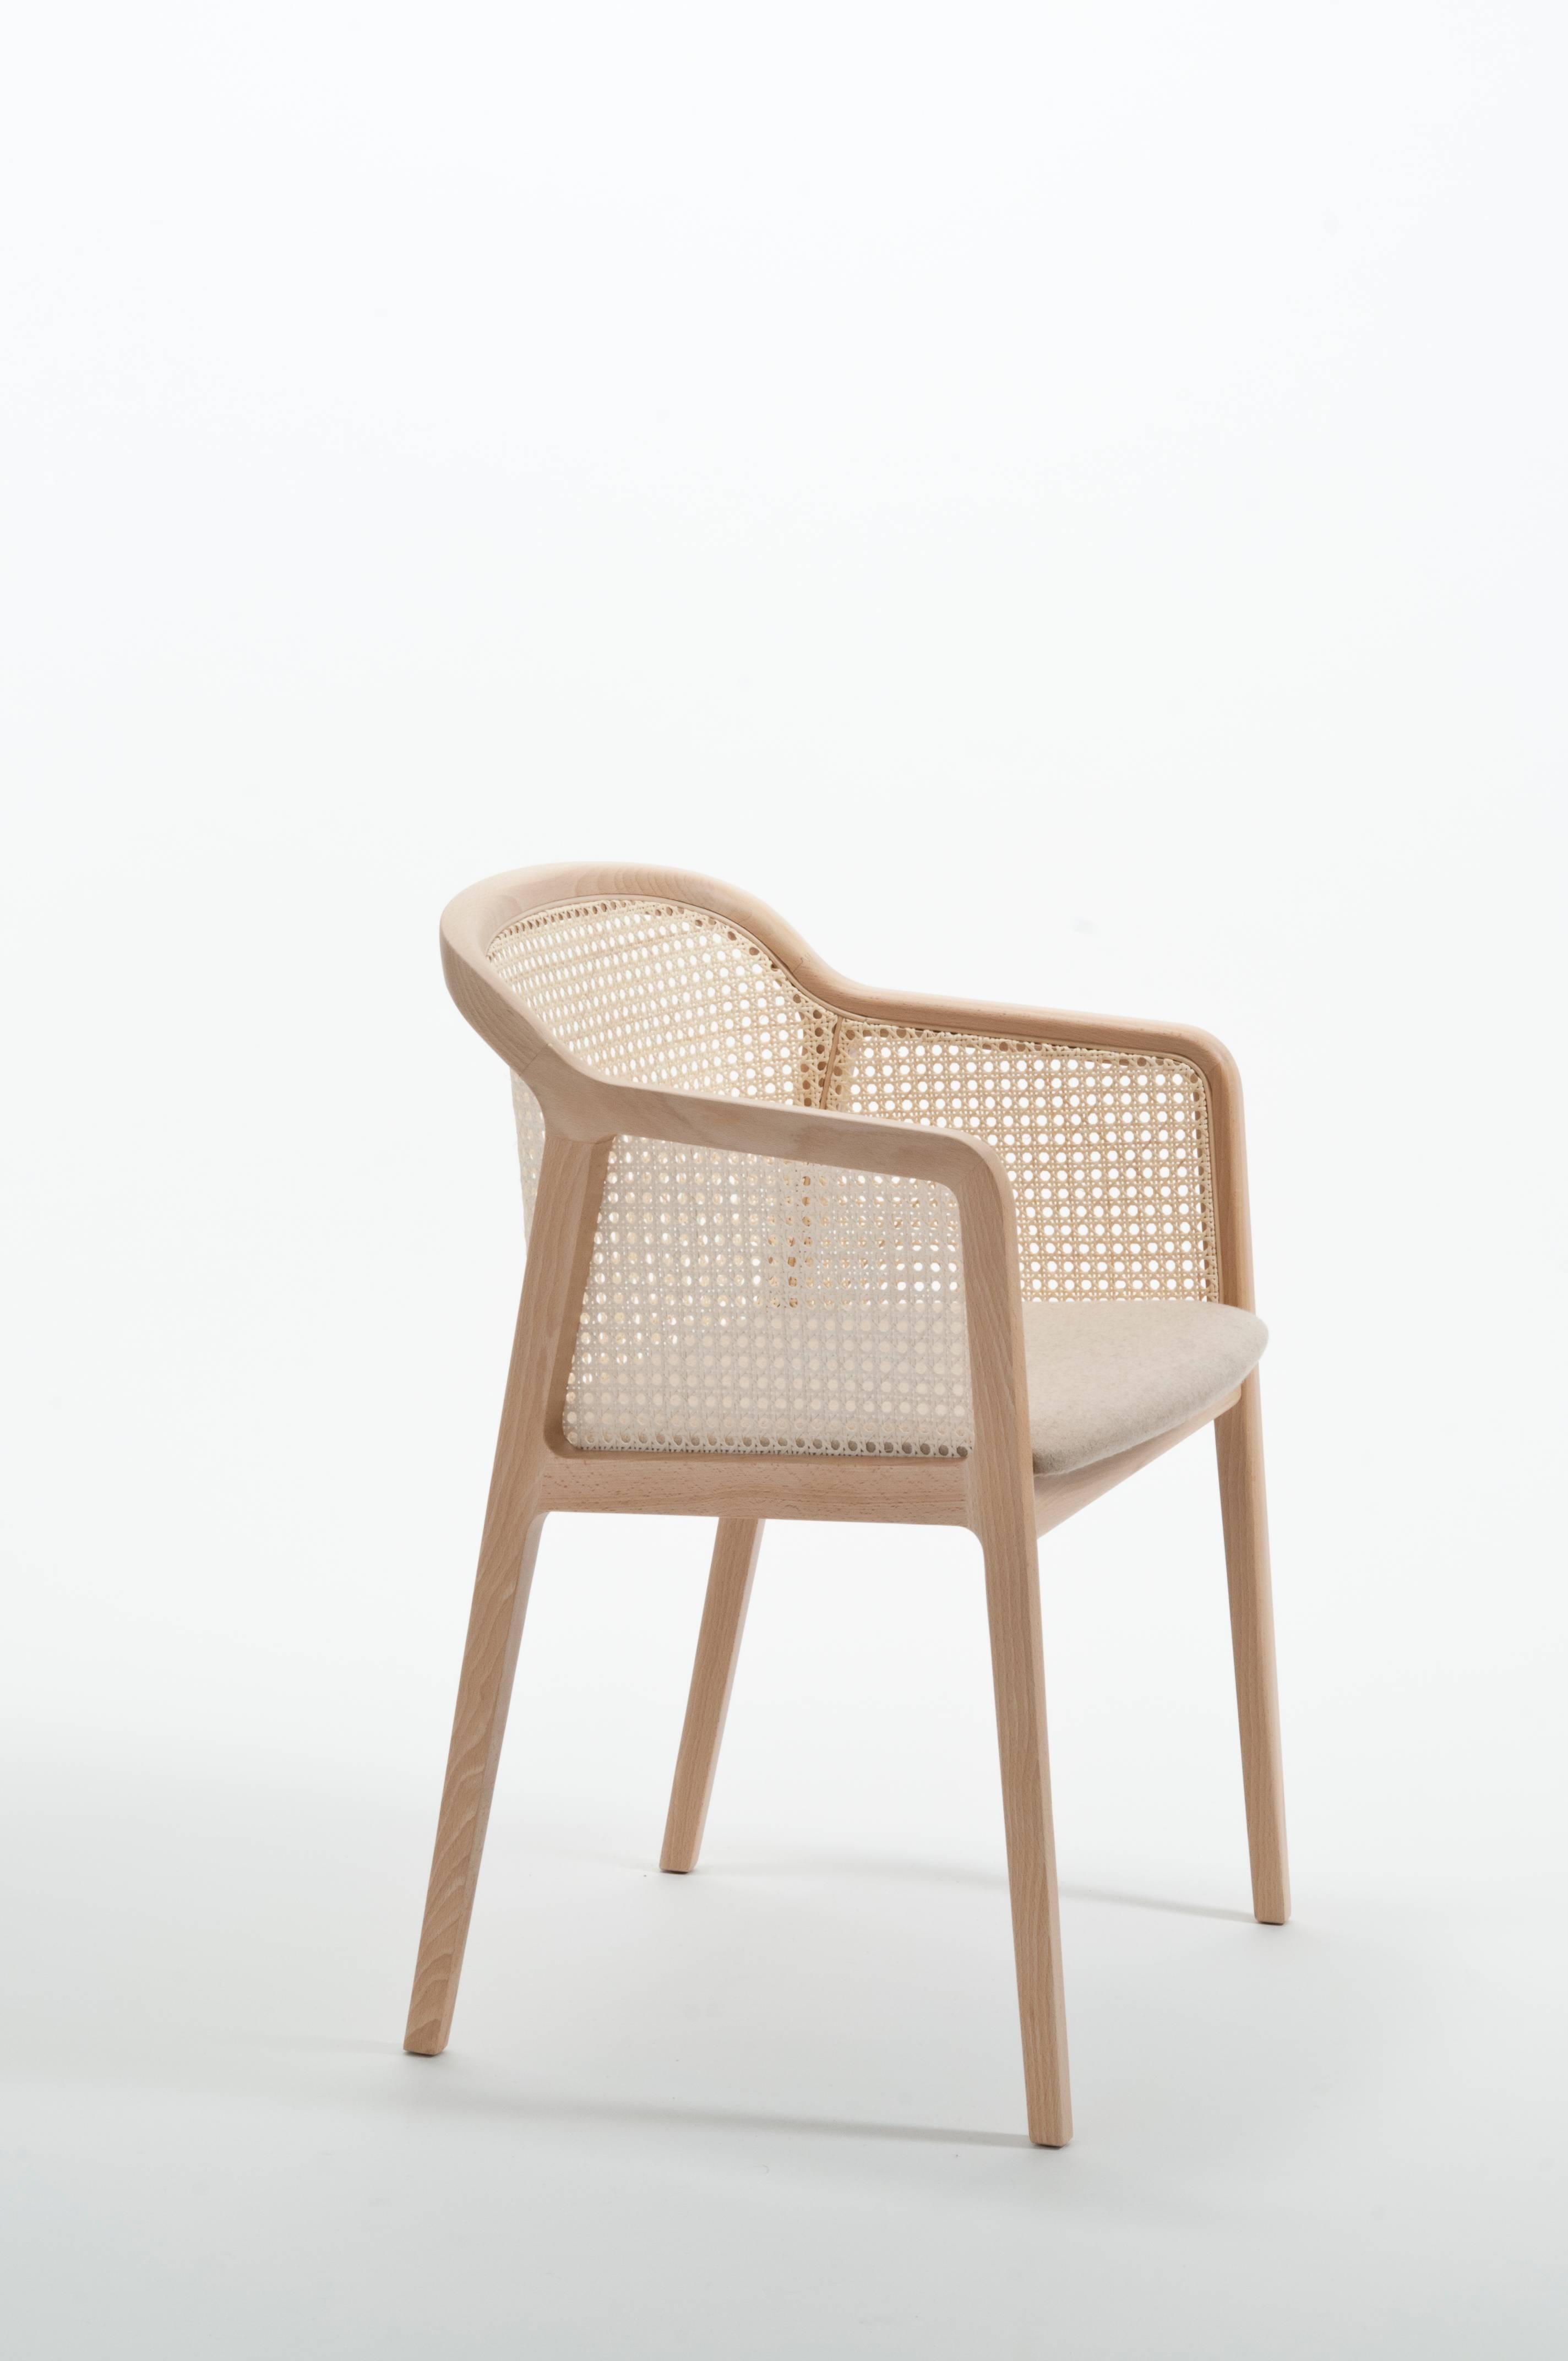 italien Vienna Armchair by Colé, Modernity Design in Wood and Straw, Green Upholstered Seat en vente